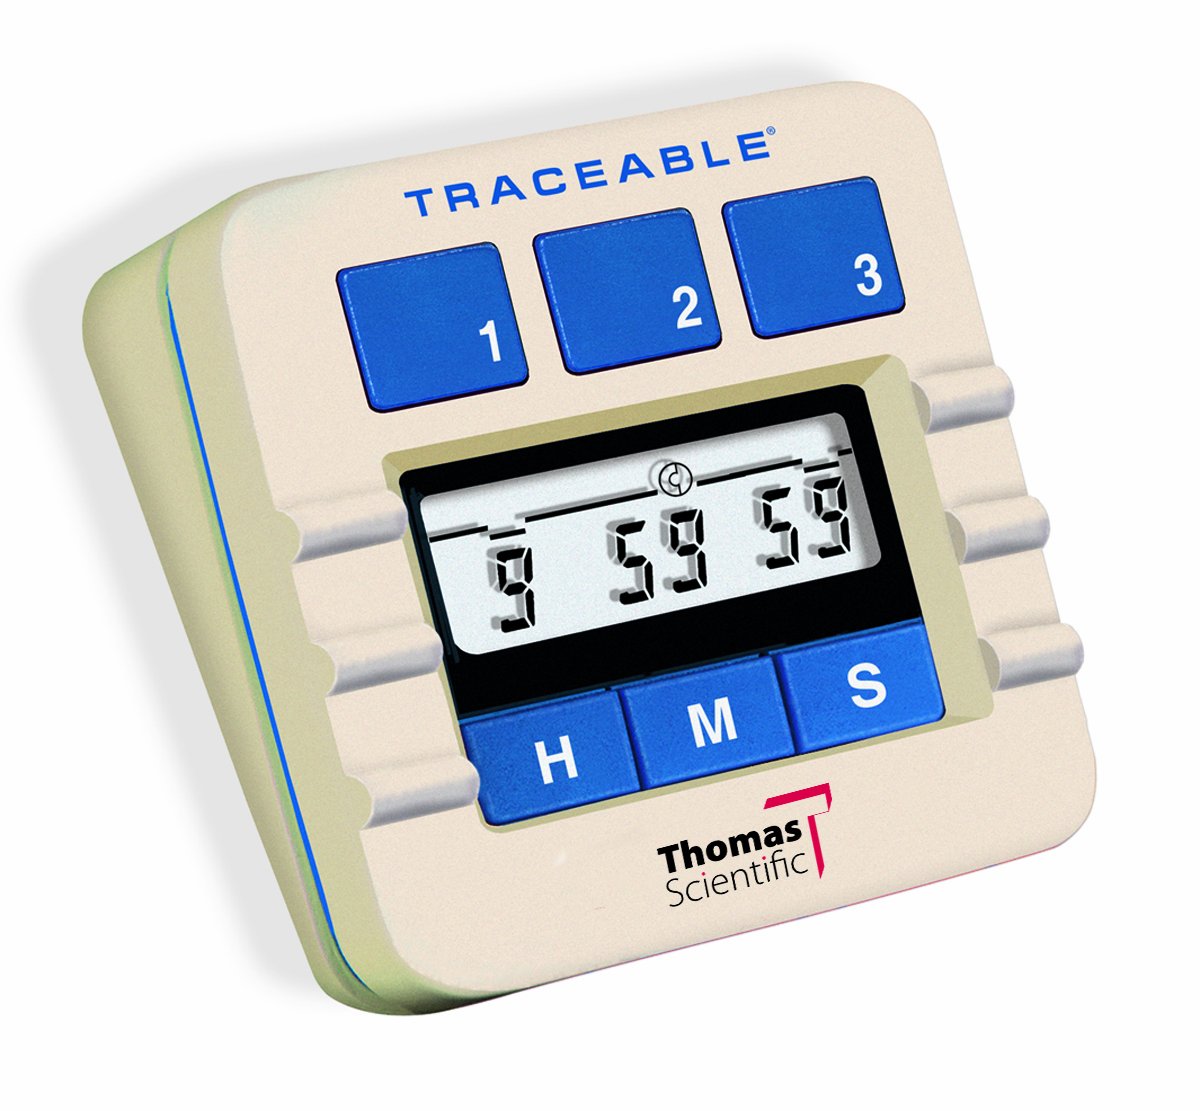 Generic Thomas 5002 Original Traceable Lab Timer, 0.01 Percent Accuracy, 3" Width x 3" Height x 1-3/8" Depth